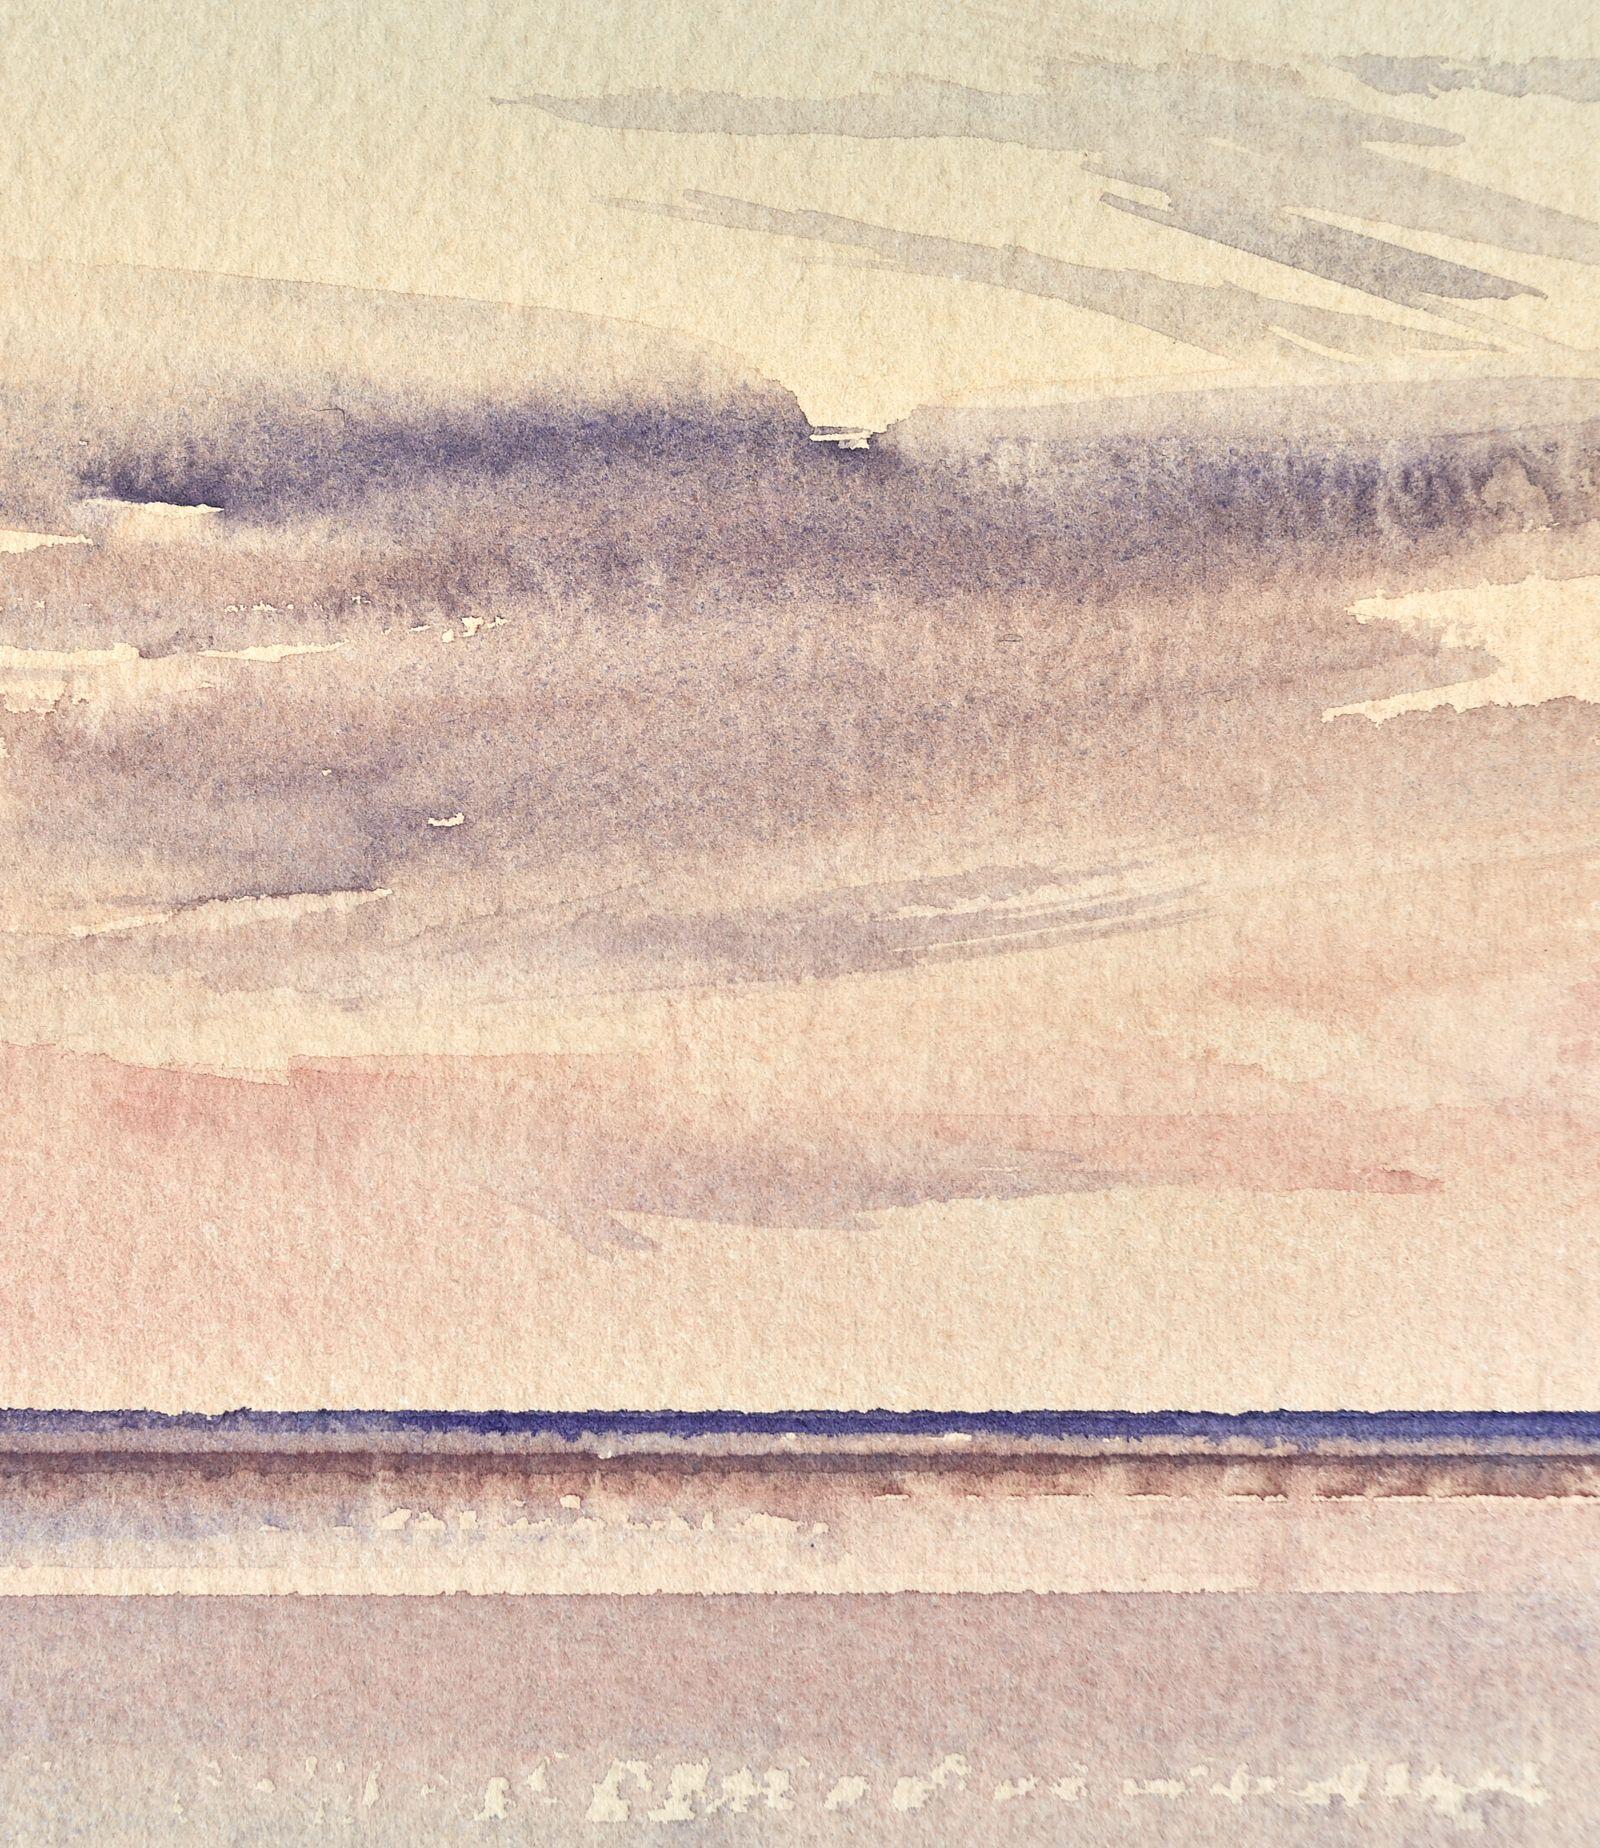 Capturing a beautiful twilight sky over the open sandy shore at St Annes-on-sea beach in Lancashire, England. A calm and tranquil seascape inspired by the summer skies over the open sea. Daniel Smith and Winsor & Newton artist watercolour paints are